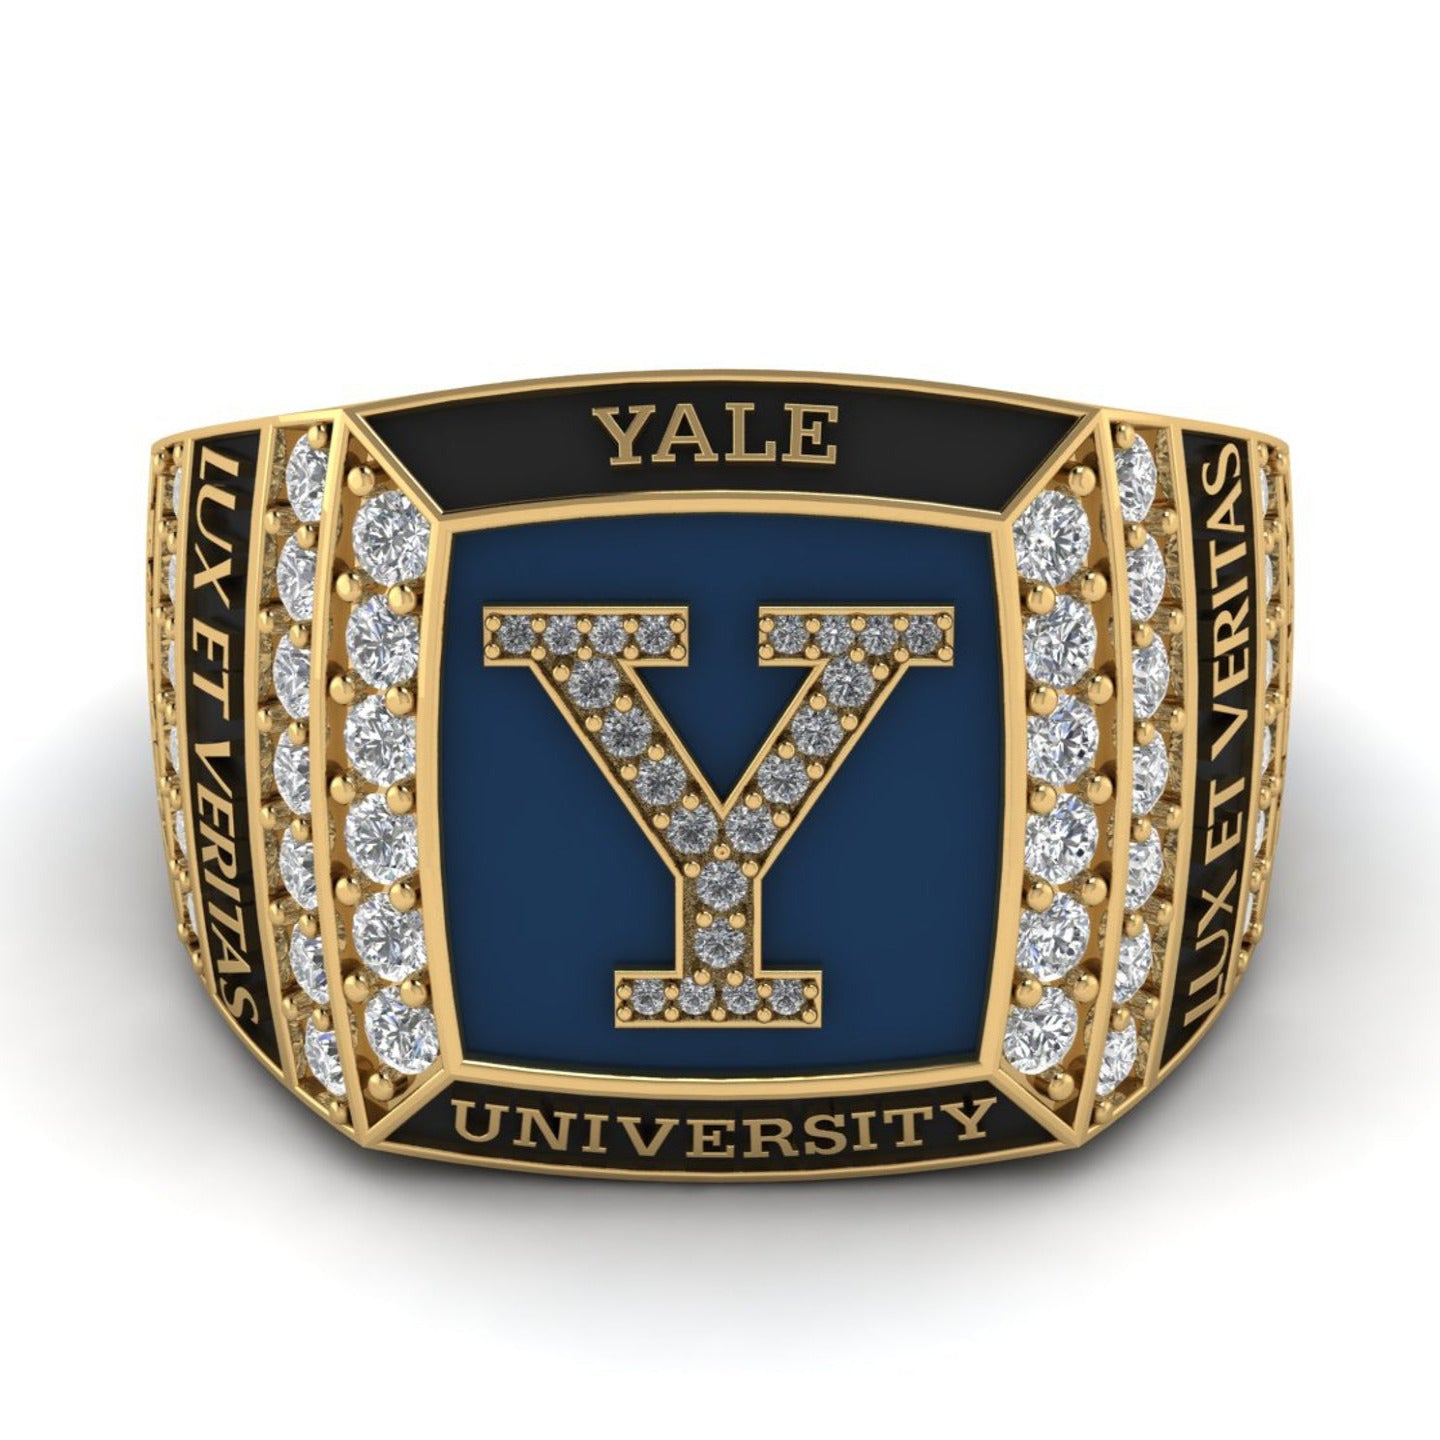 A close-up of the front of the Diamond Yale Limited Edition Ring. The ring is made of 18kt yellow gold and features 1.60 carats of diamonds. The Yale Y is the centerpiece of the ring, enamelled in a bold dark azure blue.